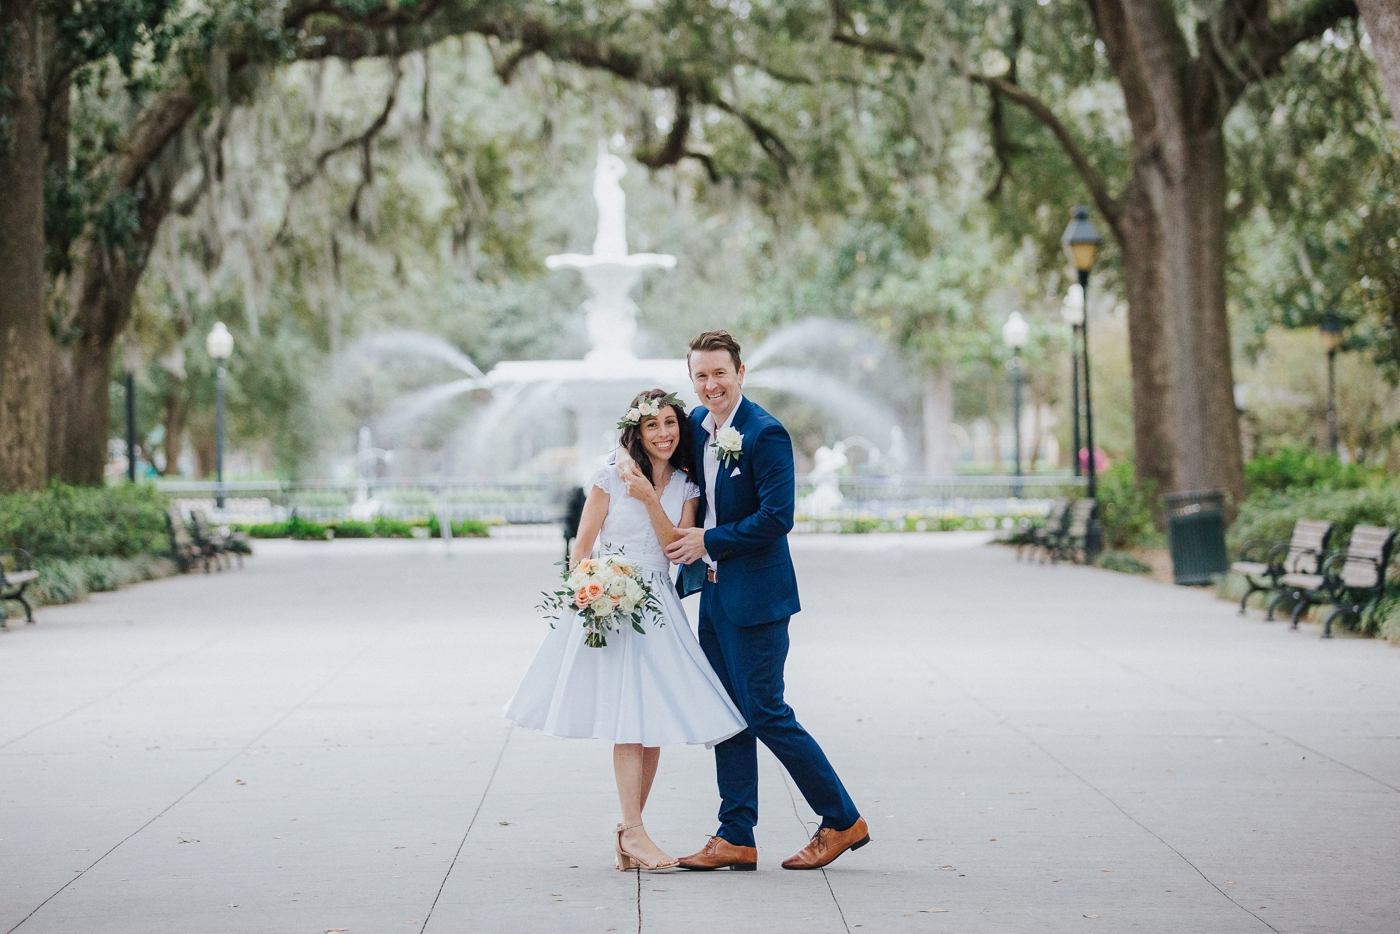 Forsyth Park Elopement in Savannah - Izzy and Co.